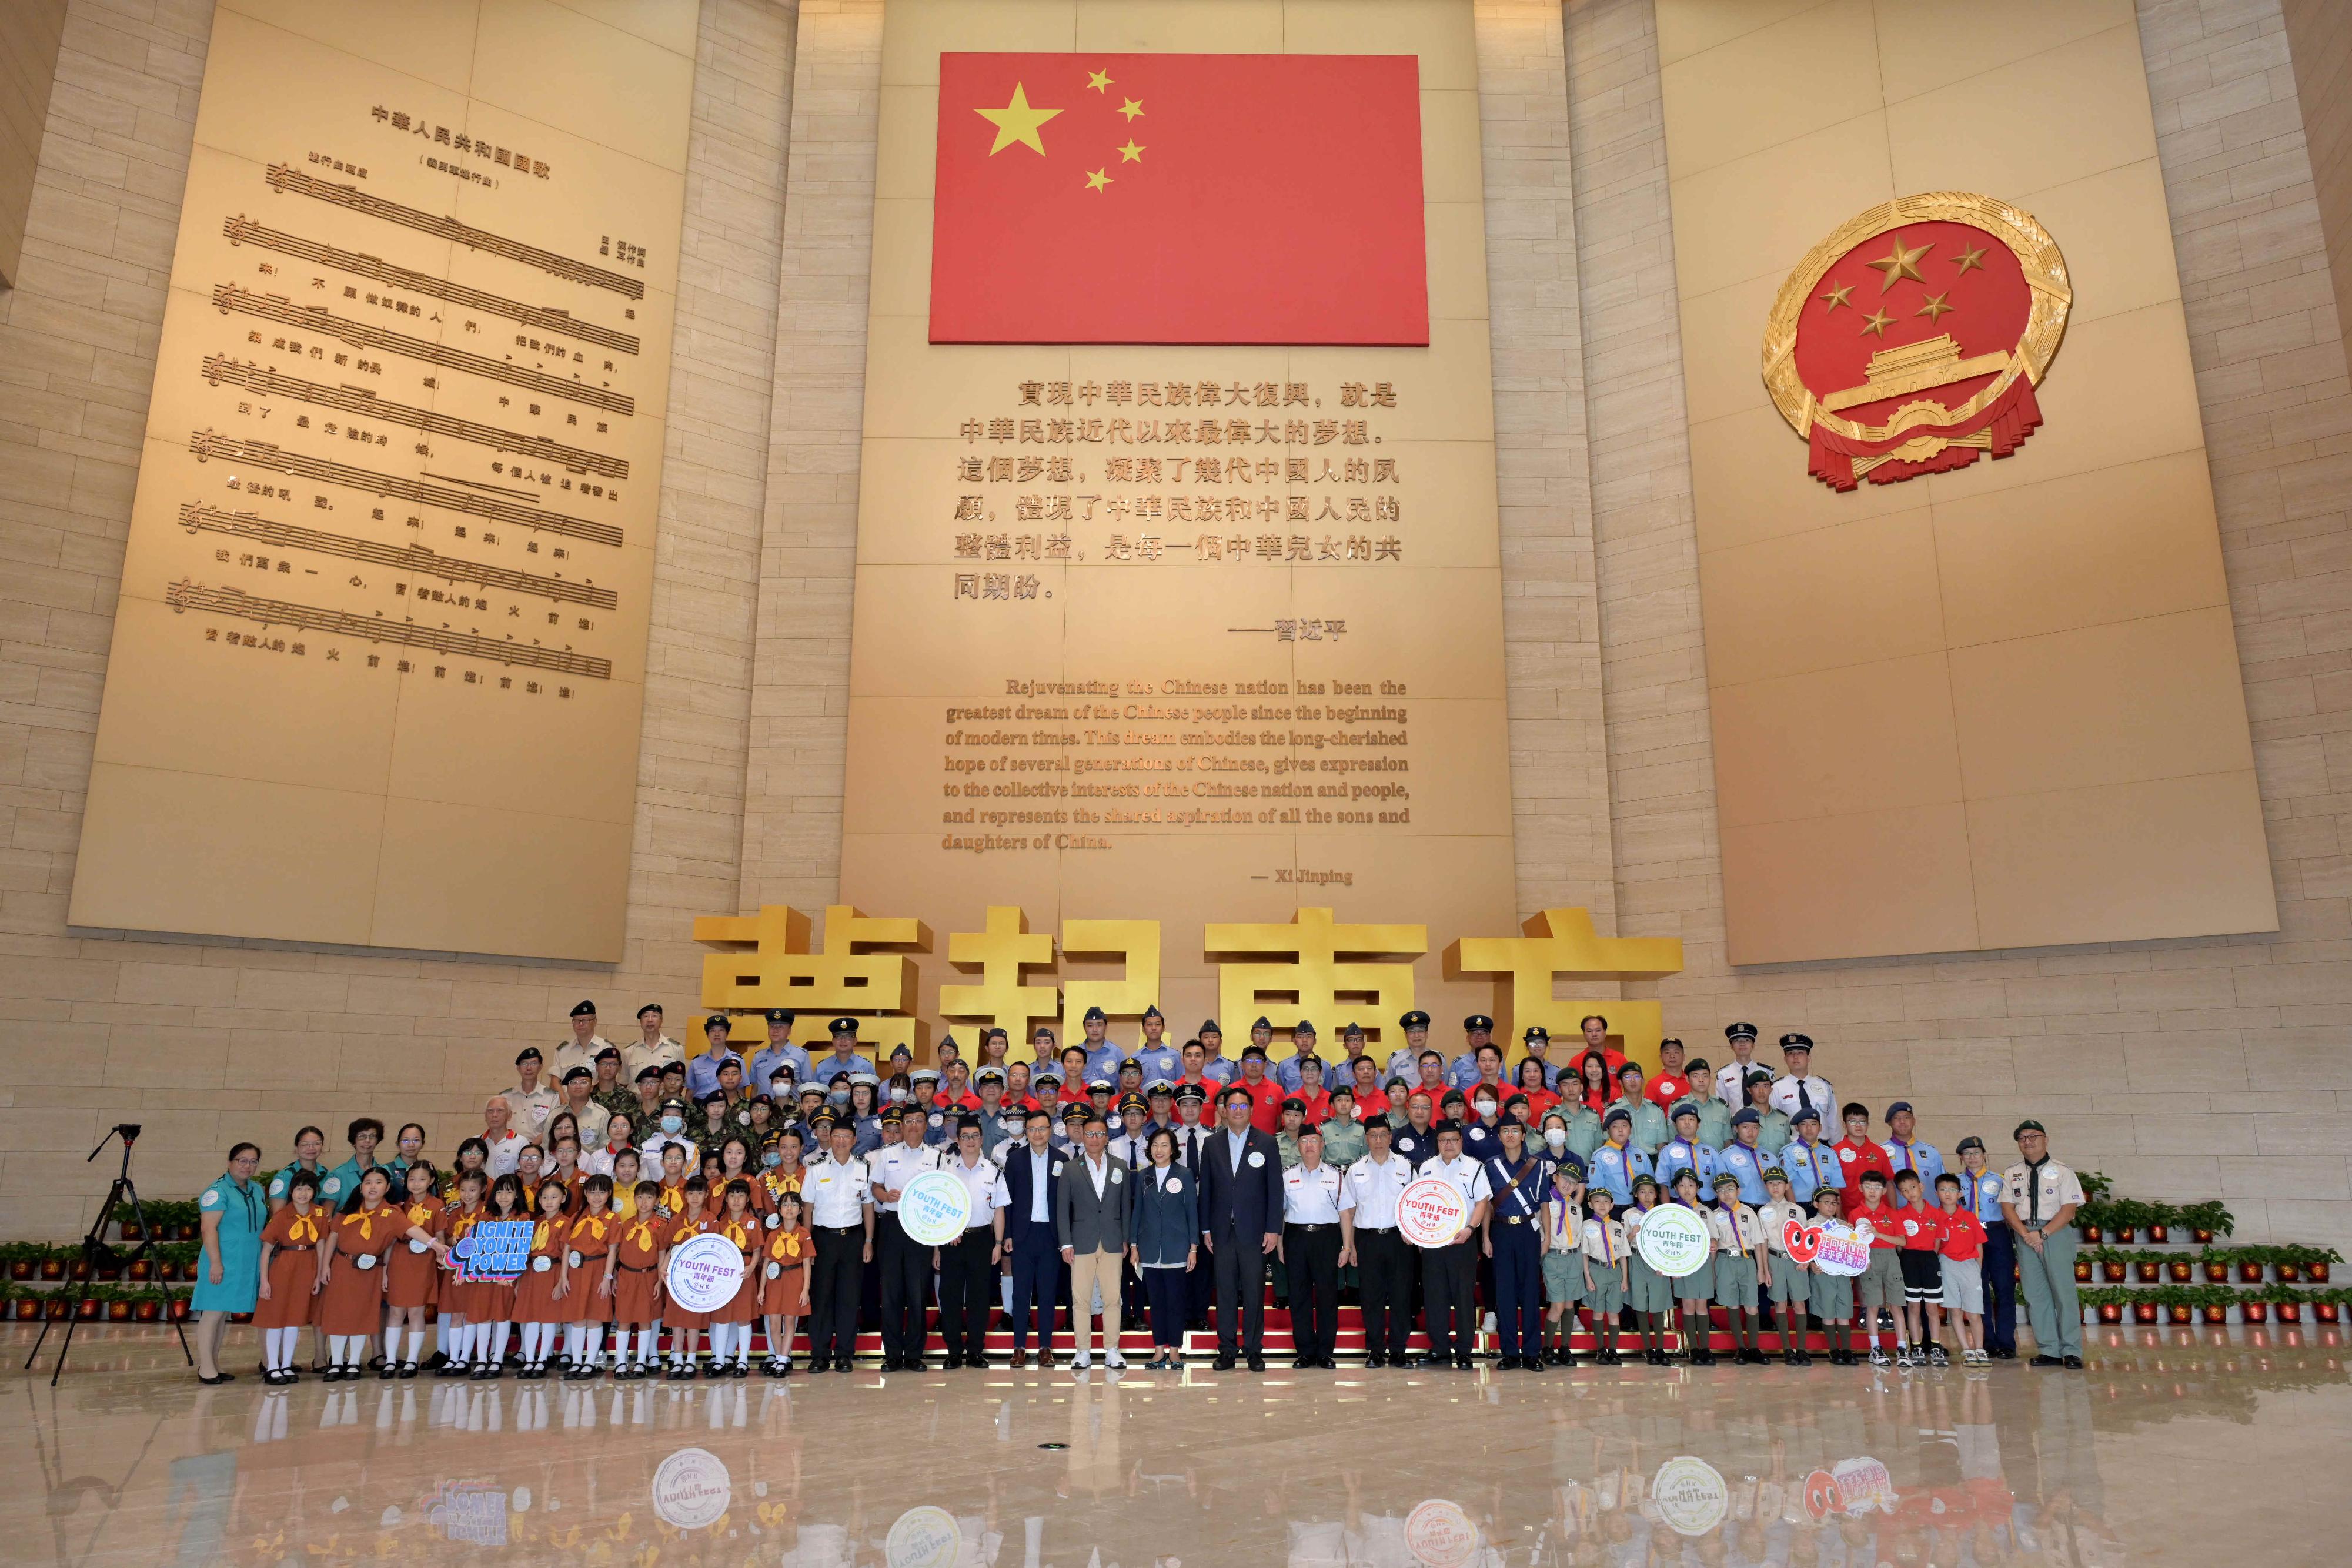 The Secretary for Home and Youth Affairs, Miss Alice Mak, today (August 30) led leaders and members of youth uniformed groups to visit the Chinese People's Liberation Army Hong Kong Garrison Exhibition Center at Ngong Shuen Chau Barracks. Photo shows Miss Mak (front row, centre); the Acting Permanent Secretary for Home and Youth Affairs, Mr Wallace Lau (front row, seventeenth left); the Under Secretary for Home and Youth Affairs, Mr Clarence Leung (front row, seventeenth right), and visiting group leaders and members.
